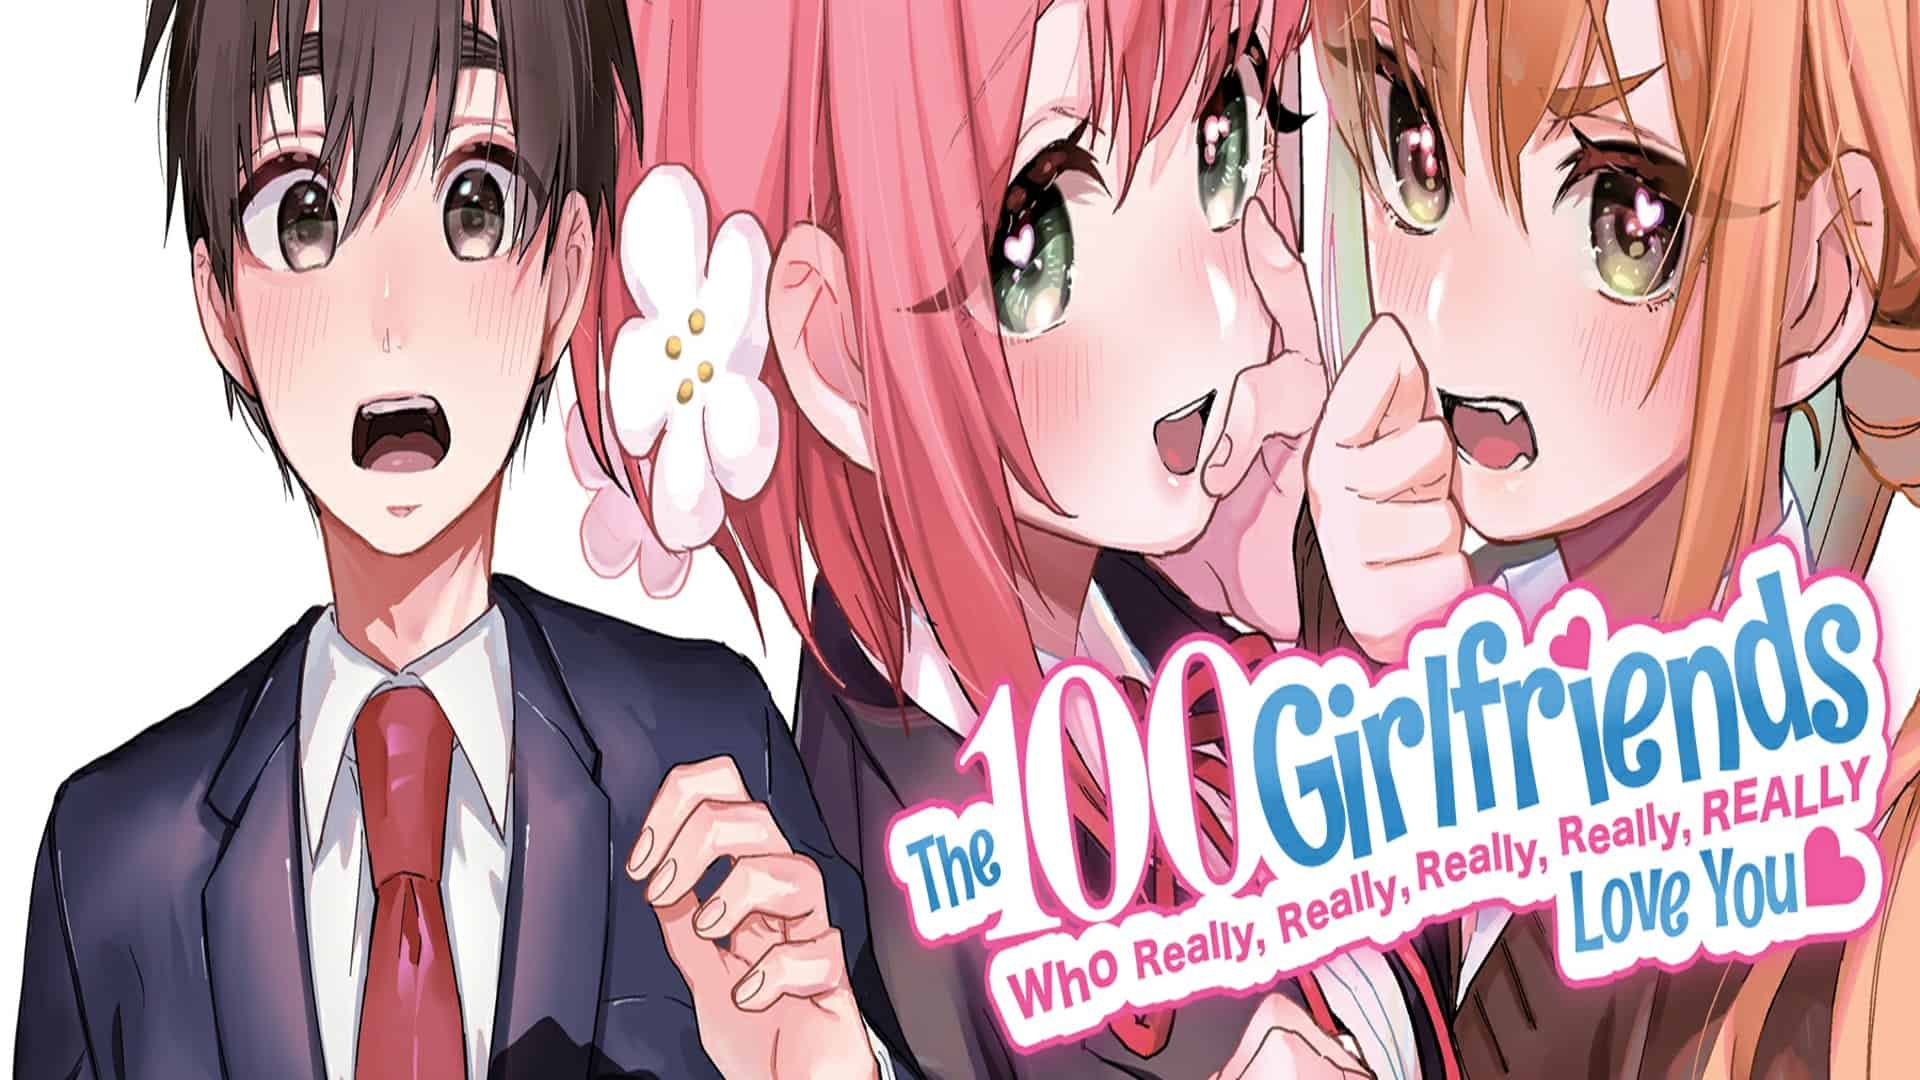 The 100 Girlfriends Who Really, Really, Really, Really, Really Love You Manga Cover Page (Credits: Seven Seas Entertainment)